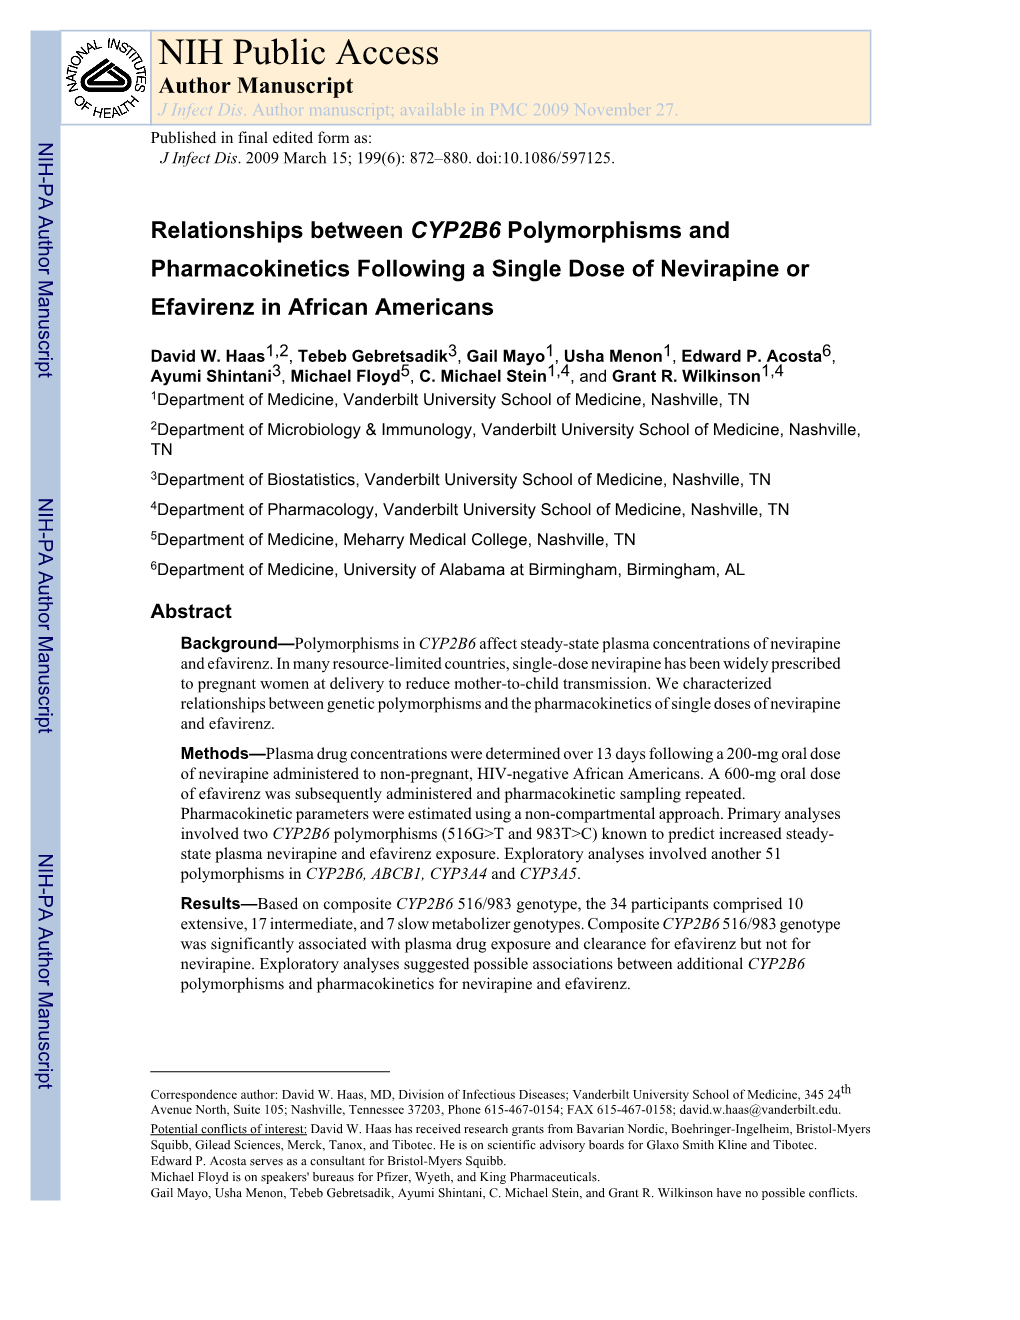 Relationships Between CYP2B6 Polymorphisms and Pharmacokinetics Following Single Dosis of Nevirapine Or Efavirenz in African Americans.Pdf